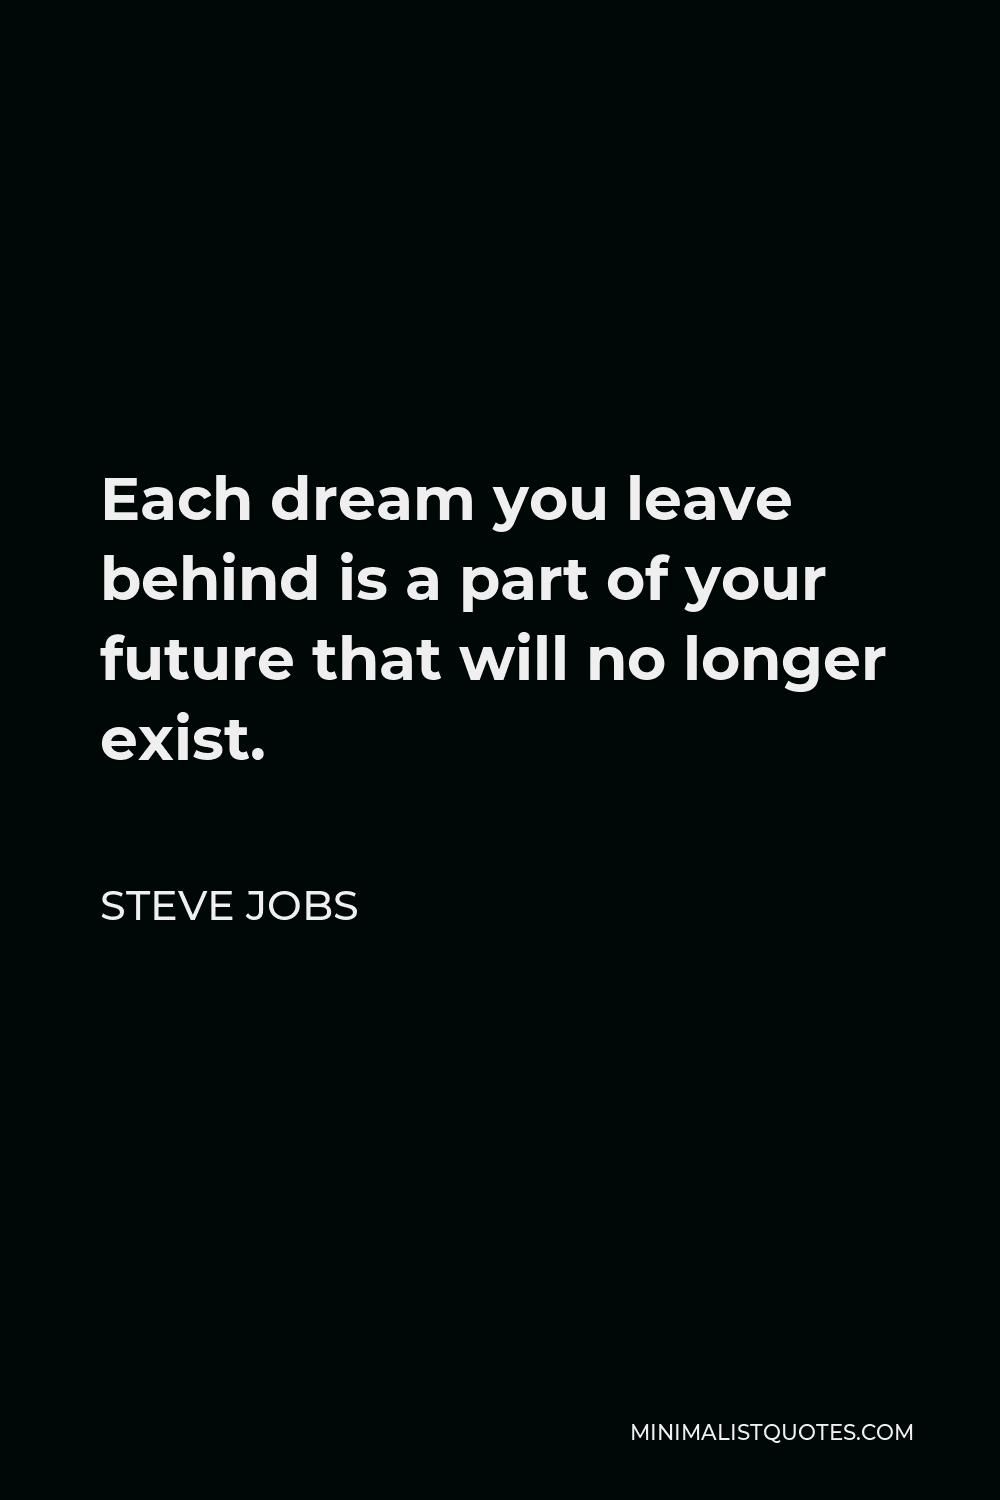 Steve Jobs Quote - Each dream you leave behind is a part of your future that will no longer exist.